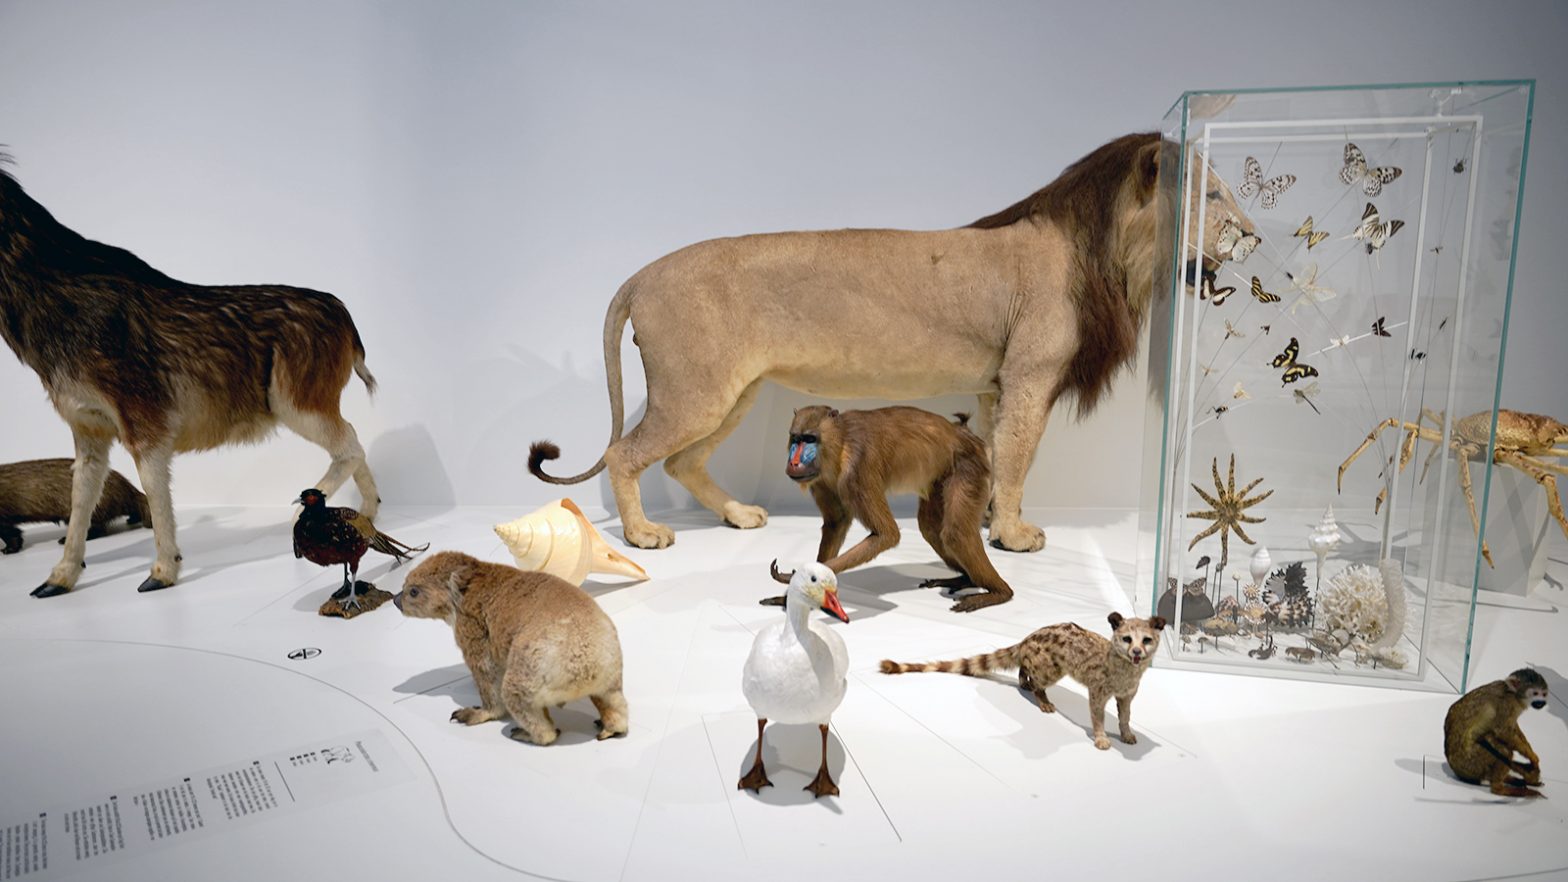 Gallery: The art and science of museum dioramas